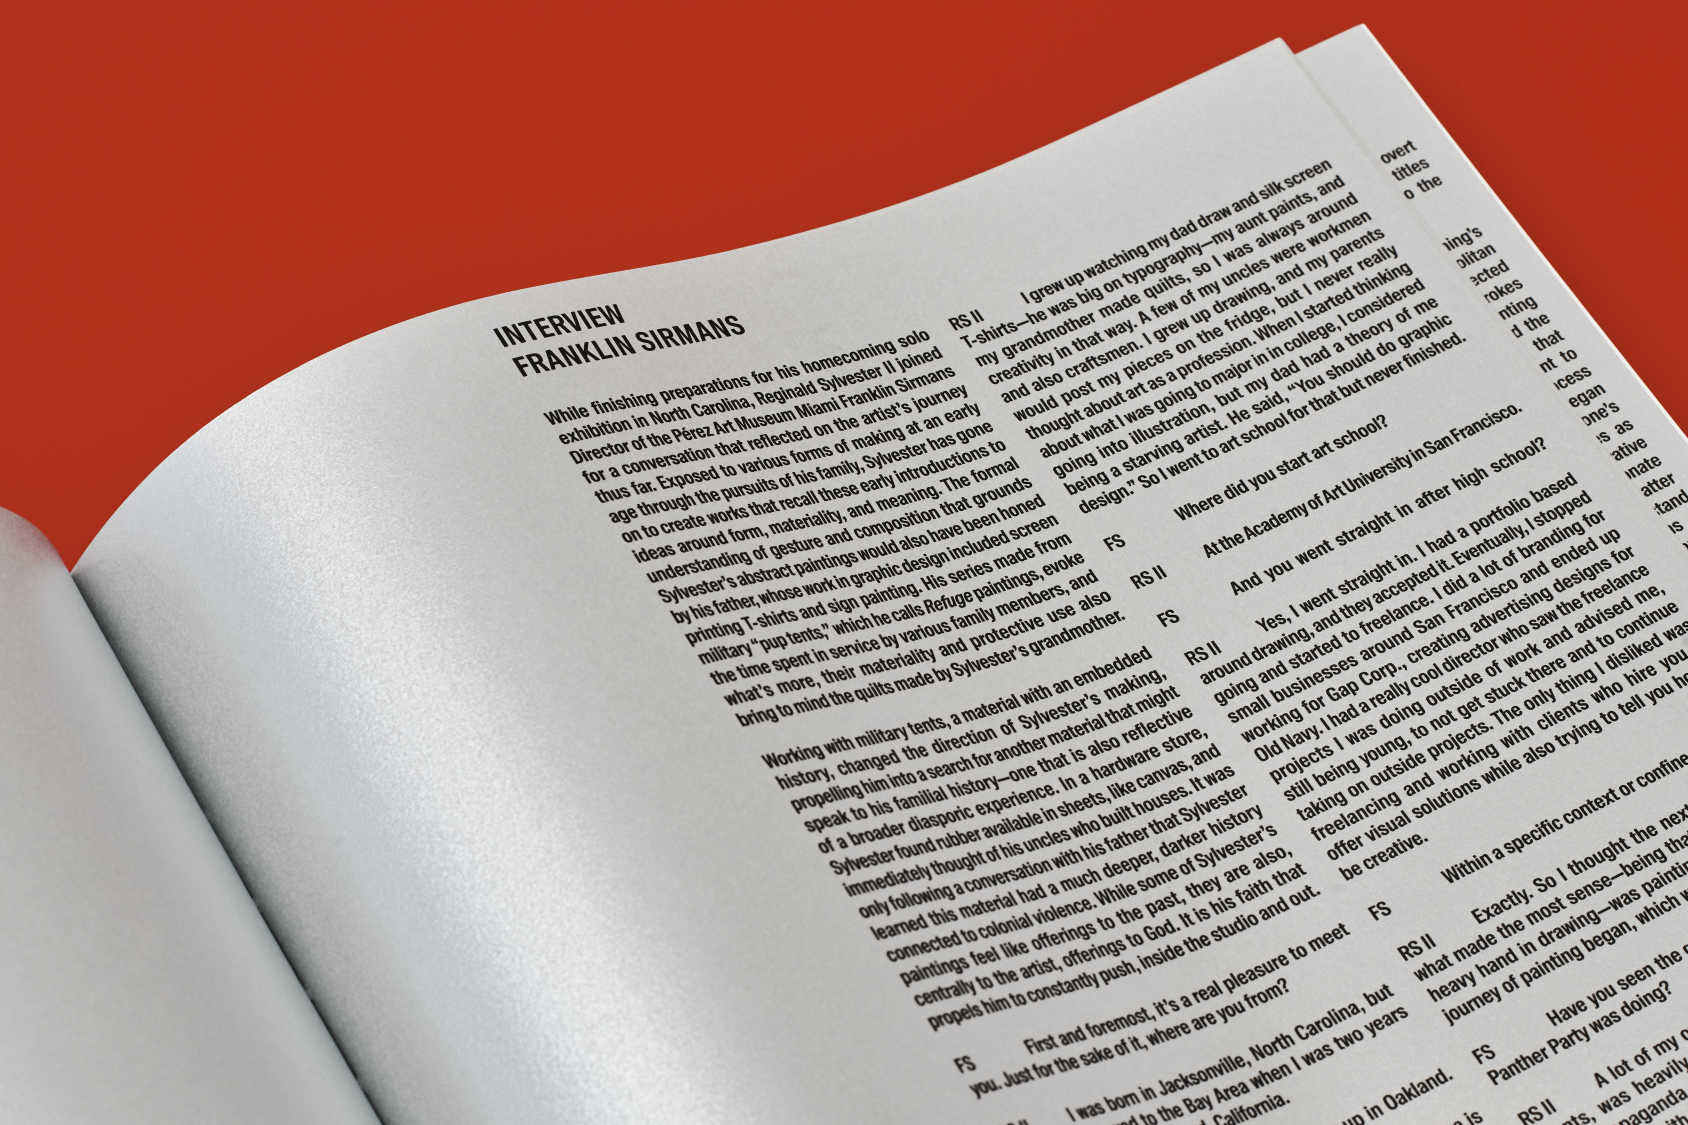 Detail of an open book resting on a red background. The white page features an interview printed in two columns of black text.